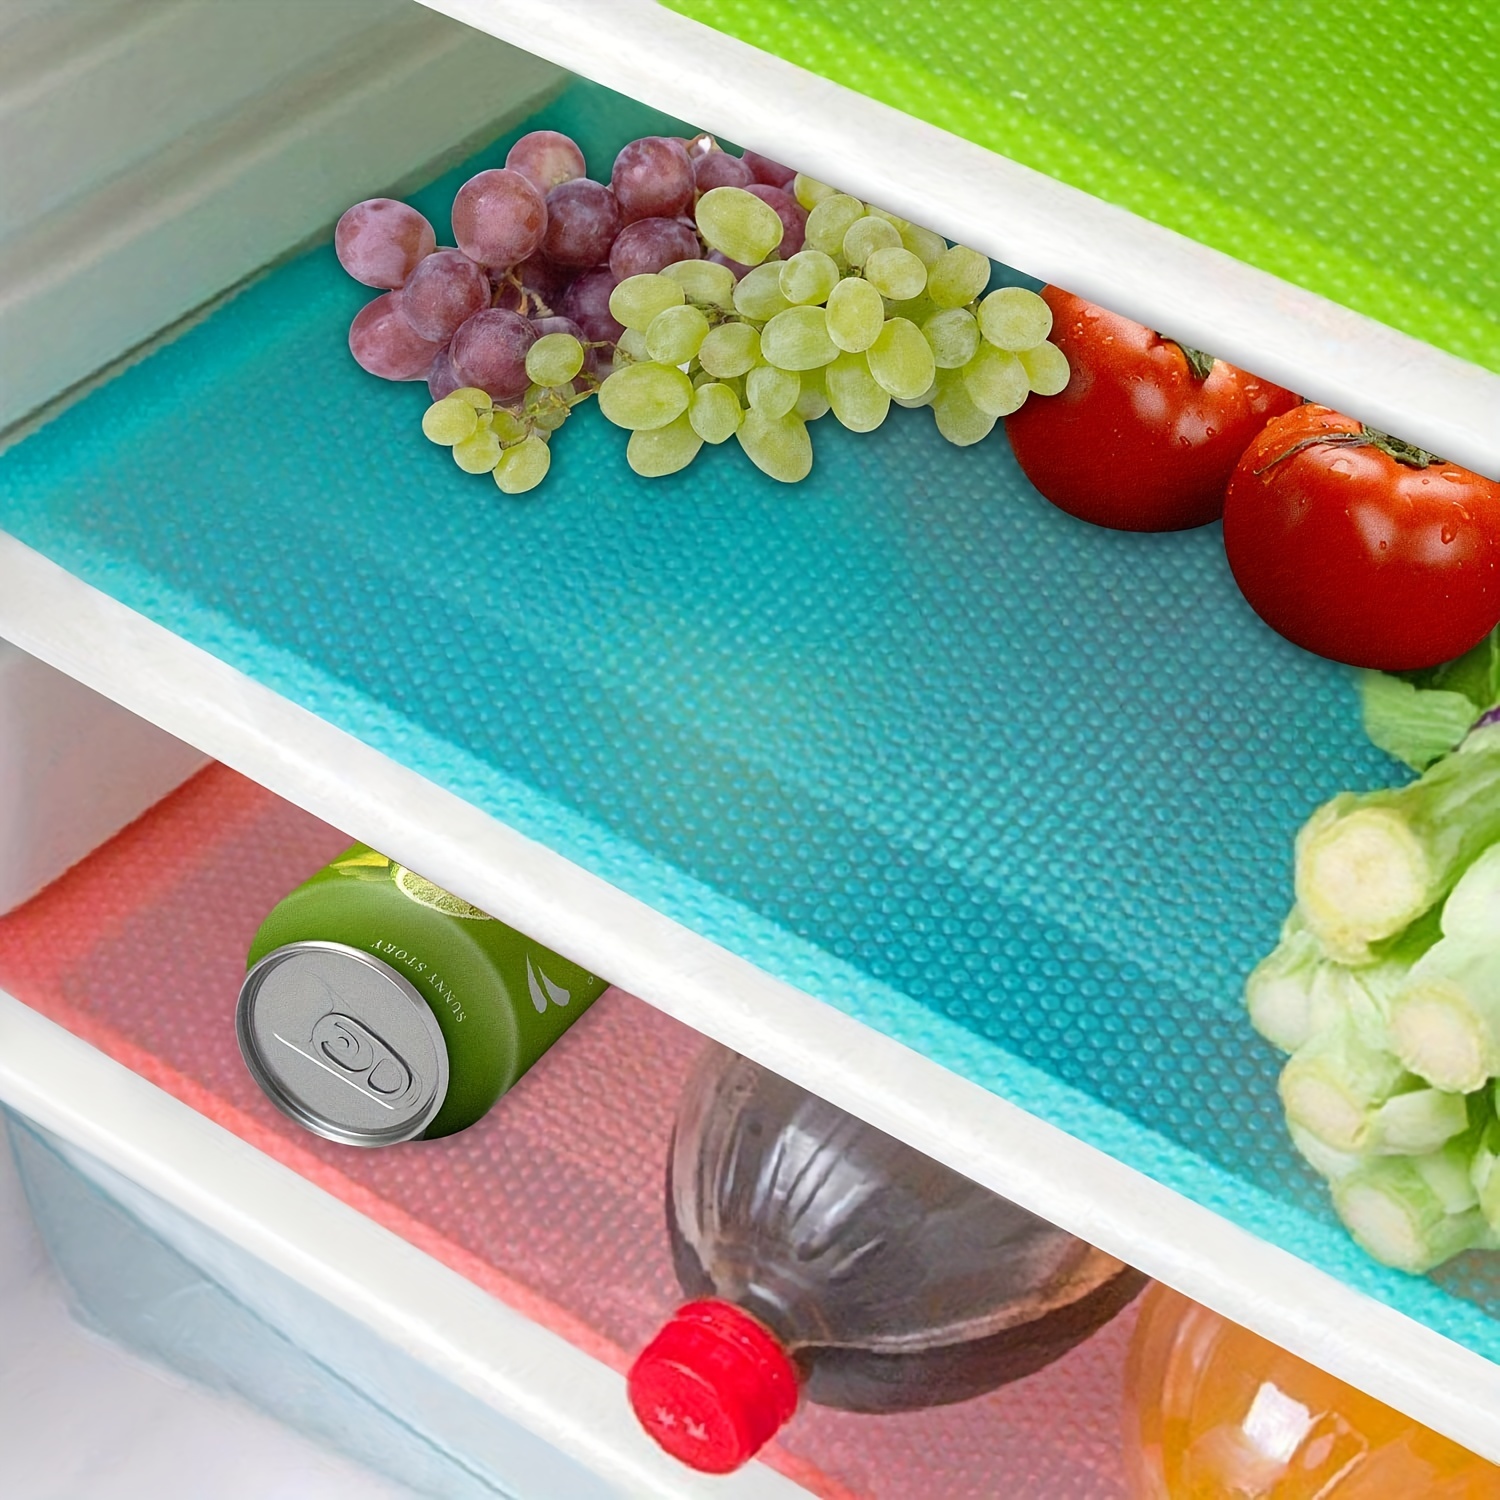 

8-pack Refrigerator Liners: Waterproof, Oilproof, And Washable Mats For Shelves, Freezers, Cupboards, And Drawers - 4 Color Mix!